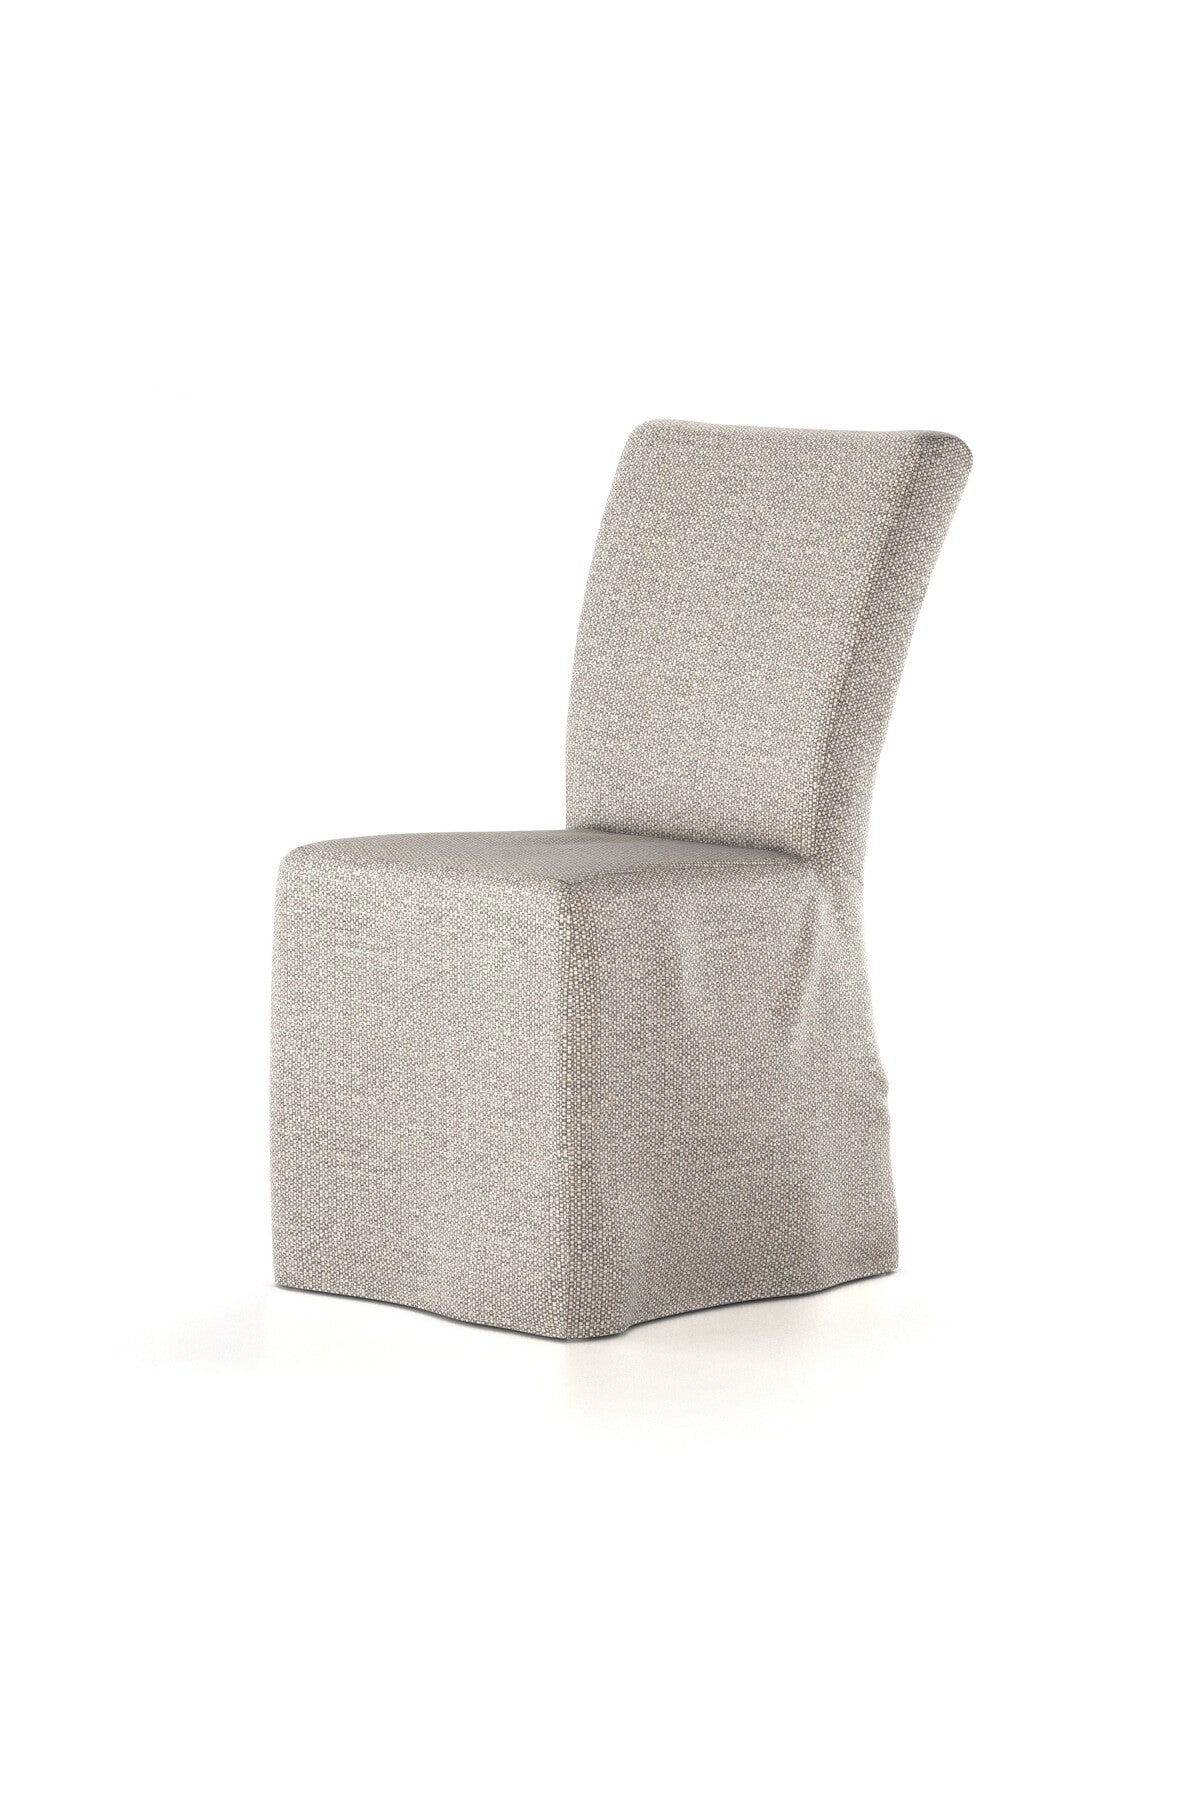 Marcy Outdoor Slipcover Dining Chair